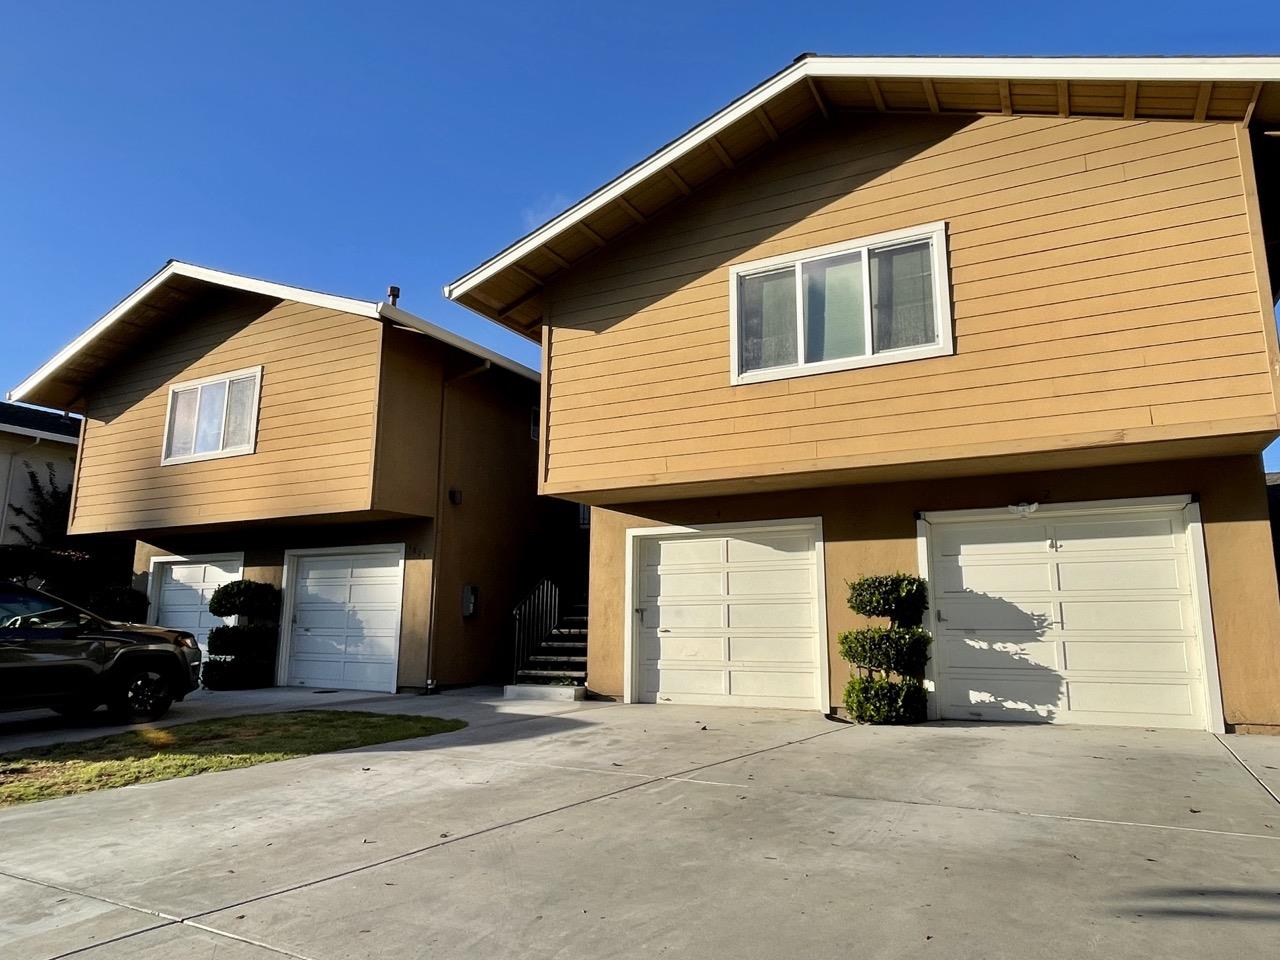 Photo of 1673 Whitwood Ln in Campbell, CA